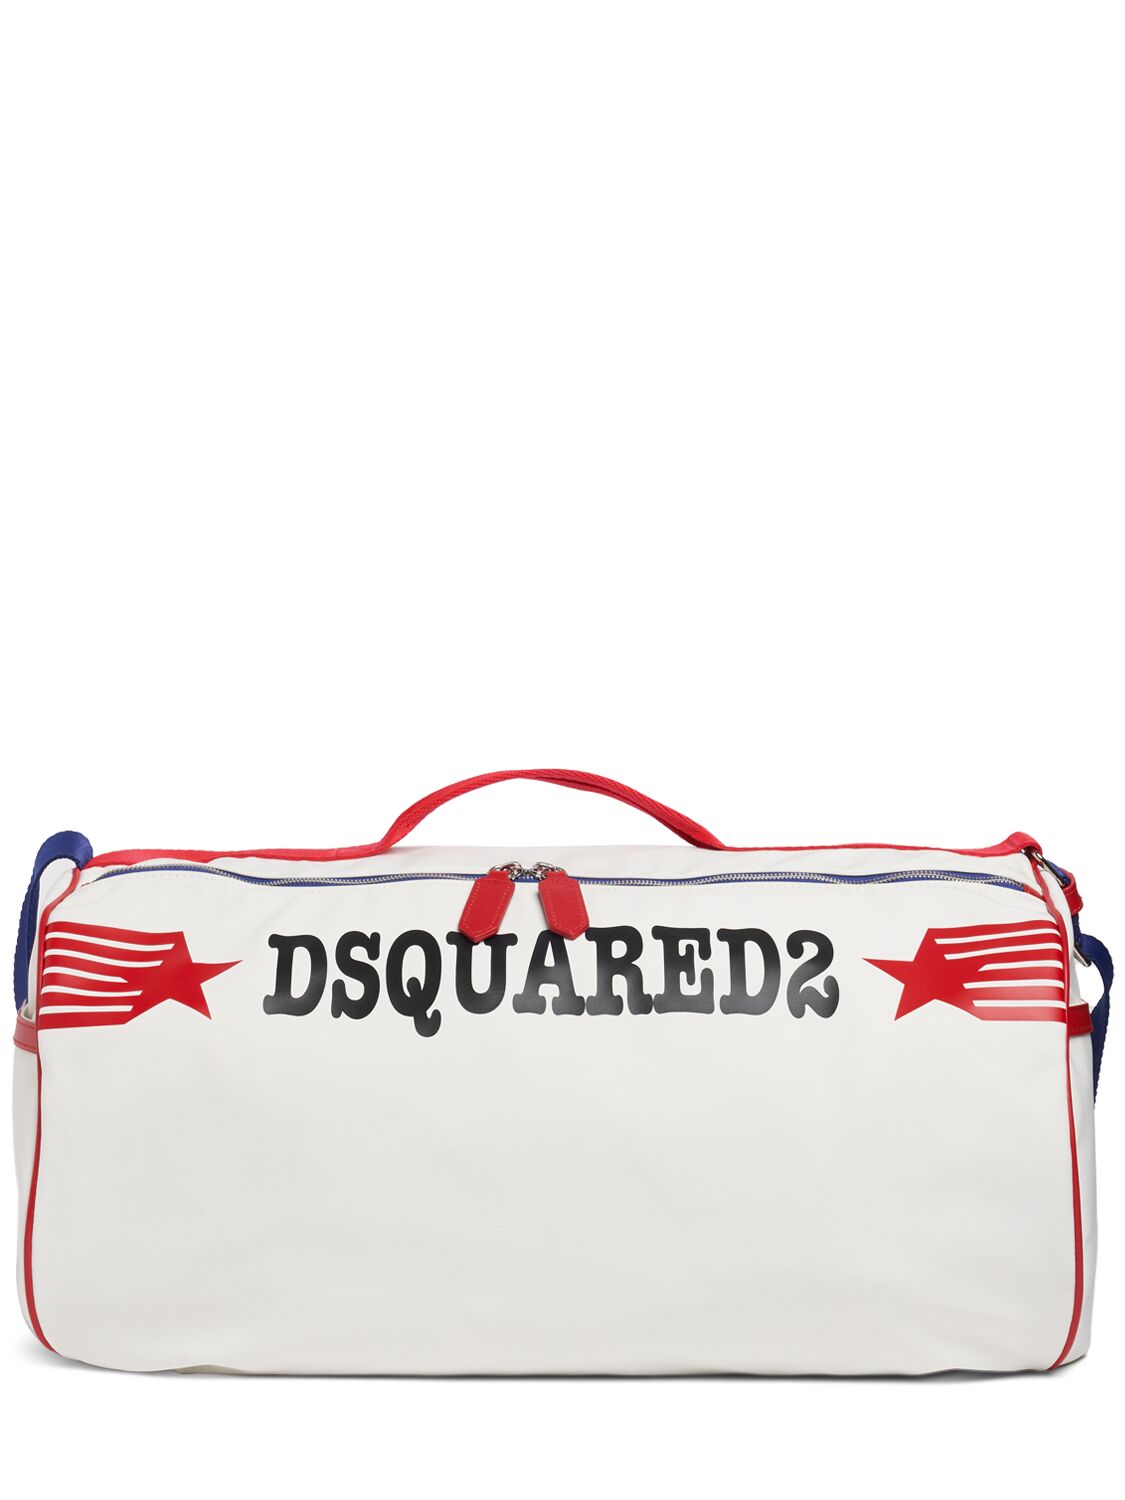 Image of Rocco Dsquared2 Duffle Bag